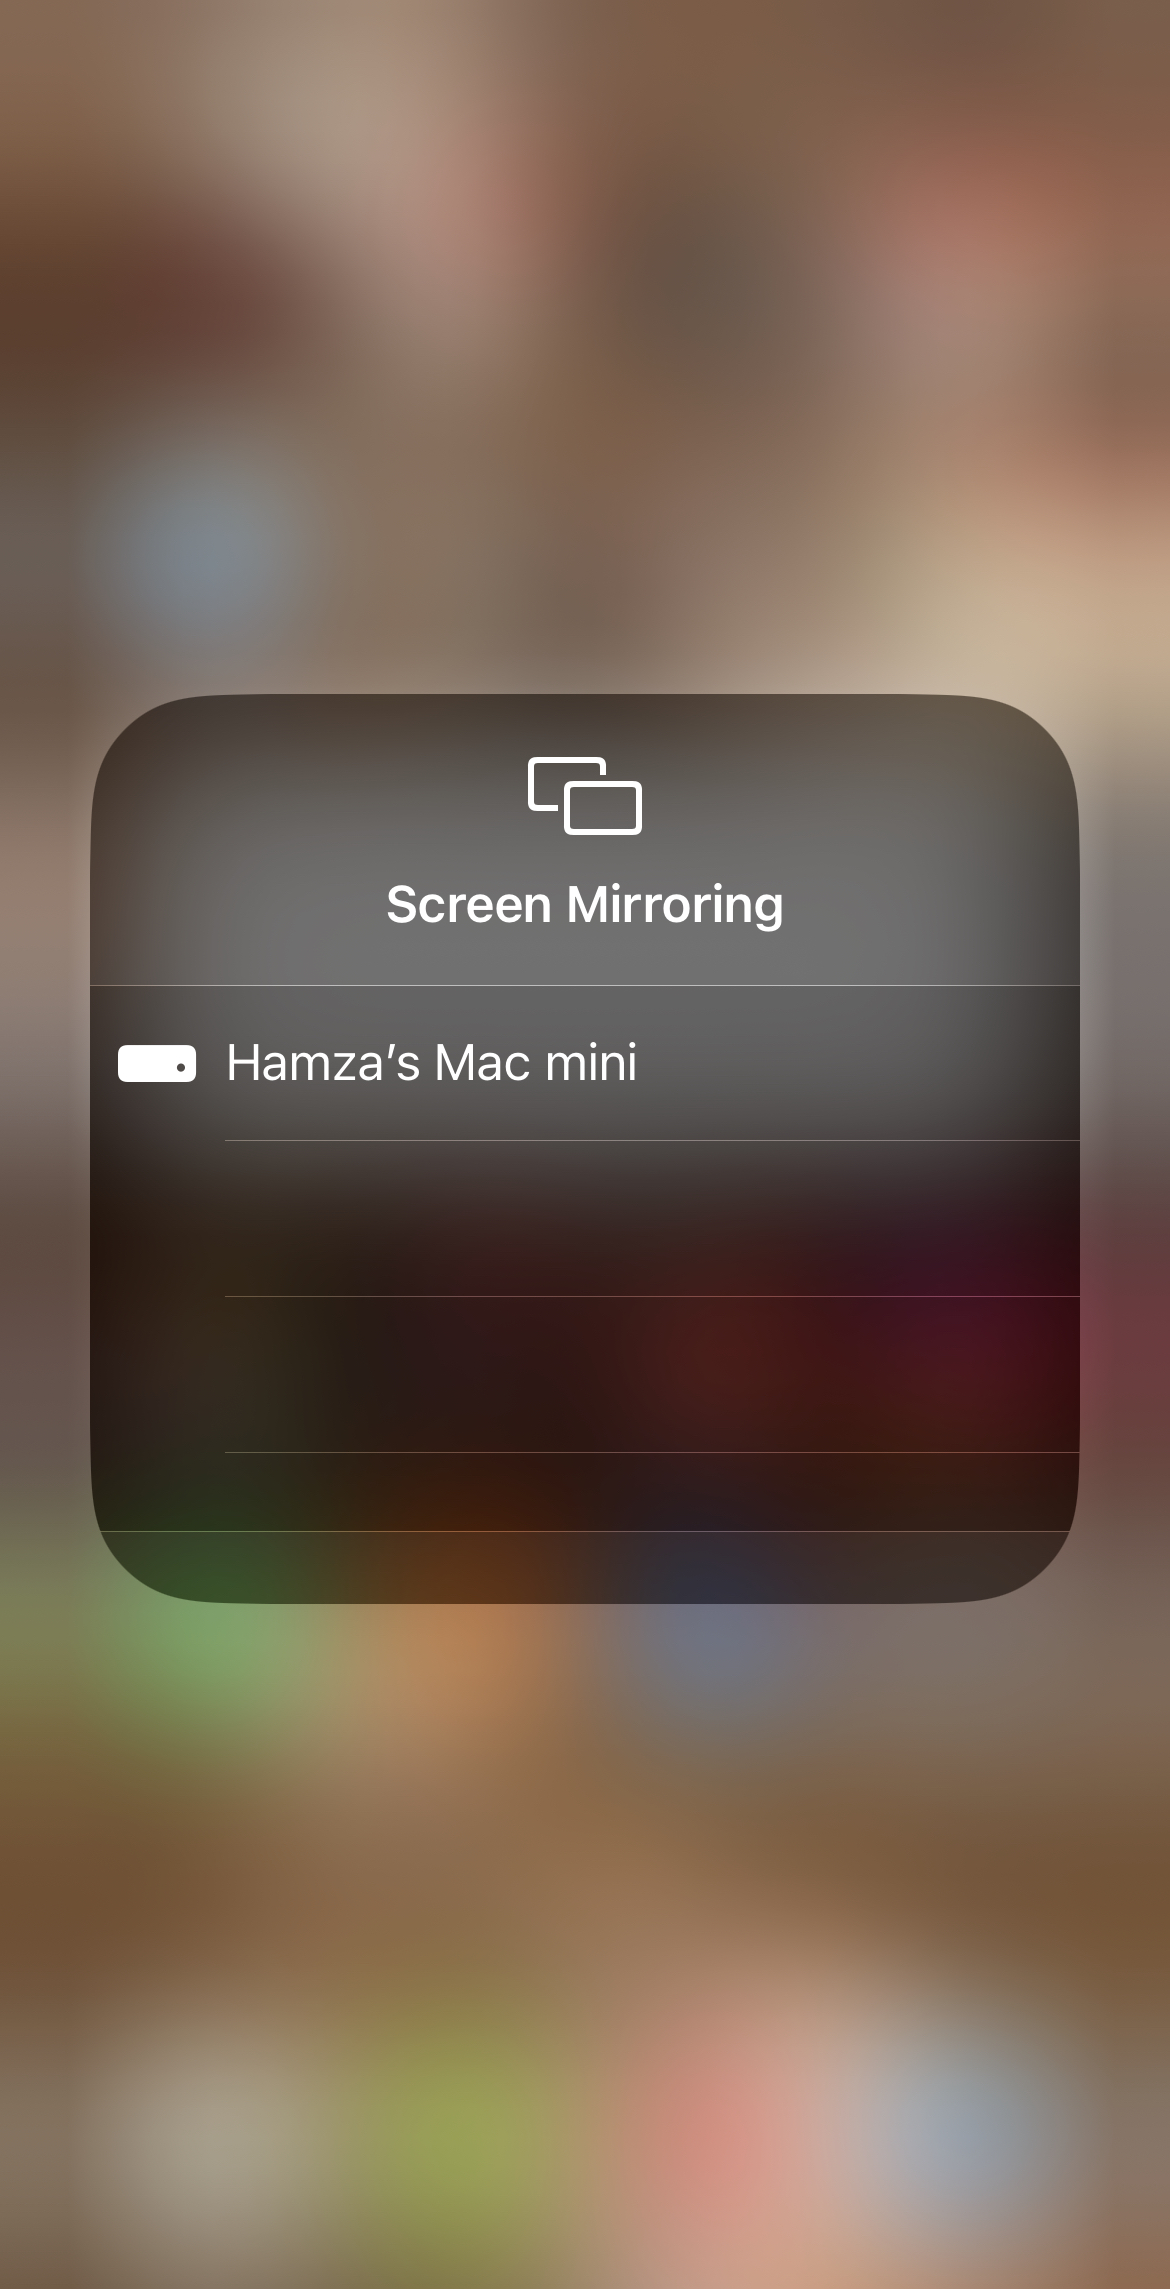 Using iPhone's built-in screen broadcasting feature